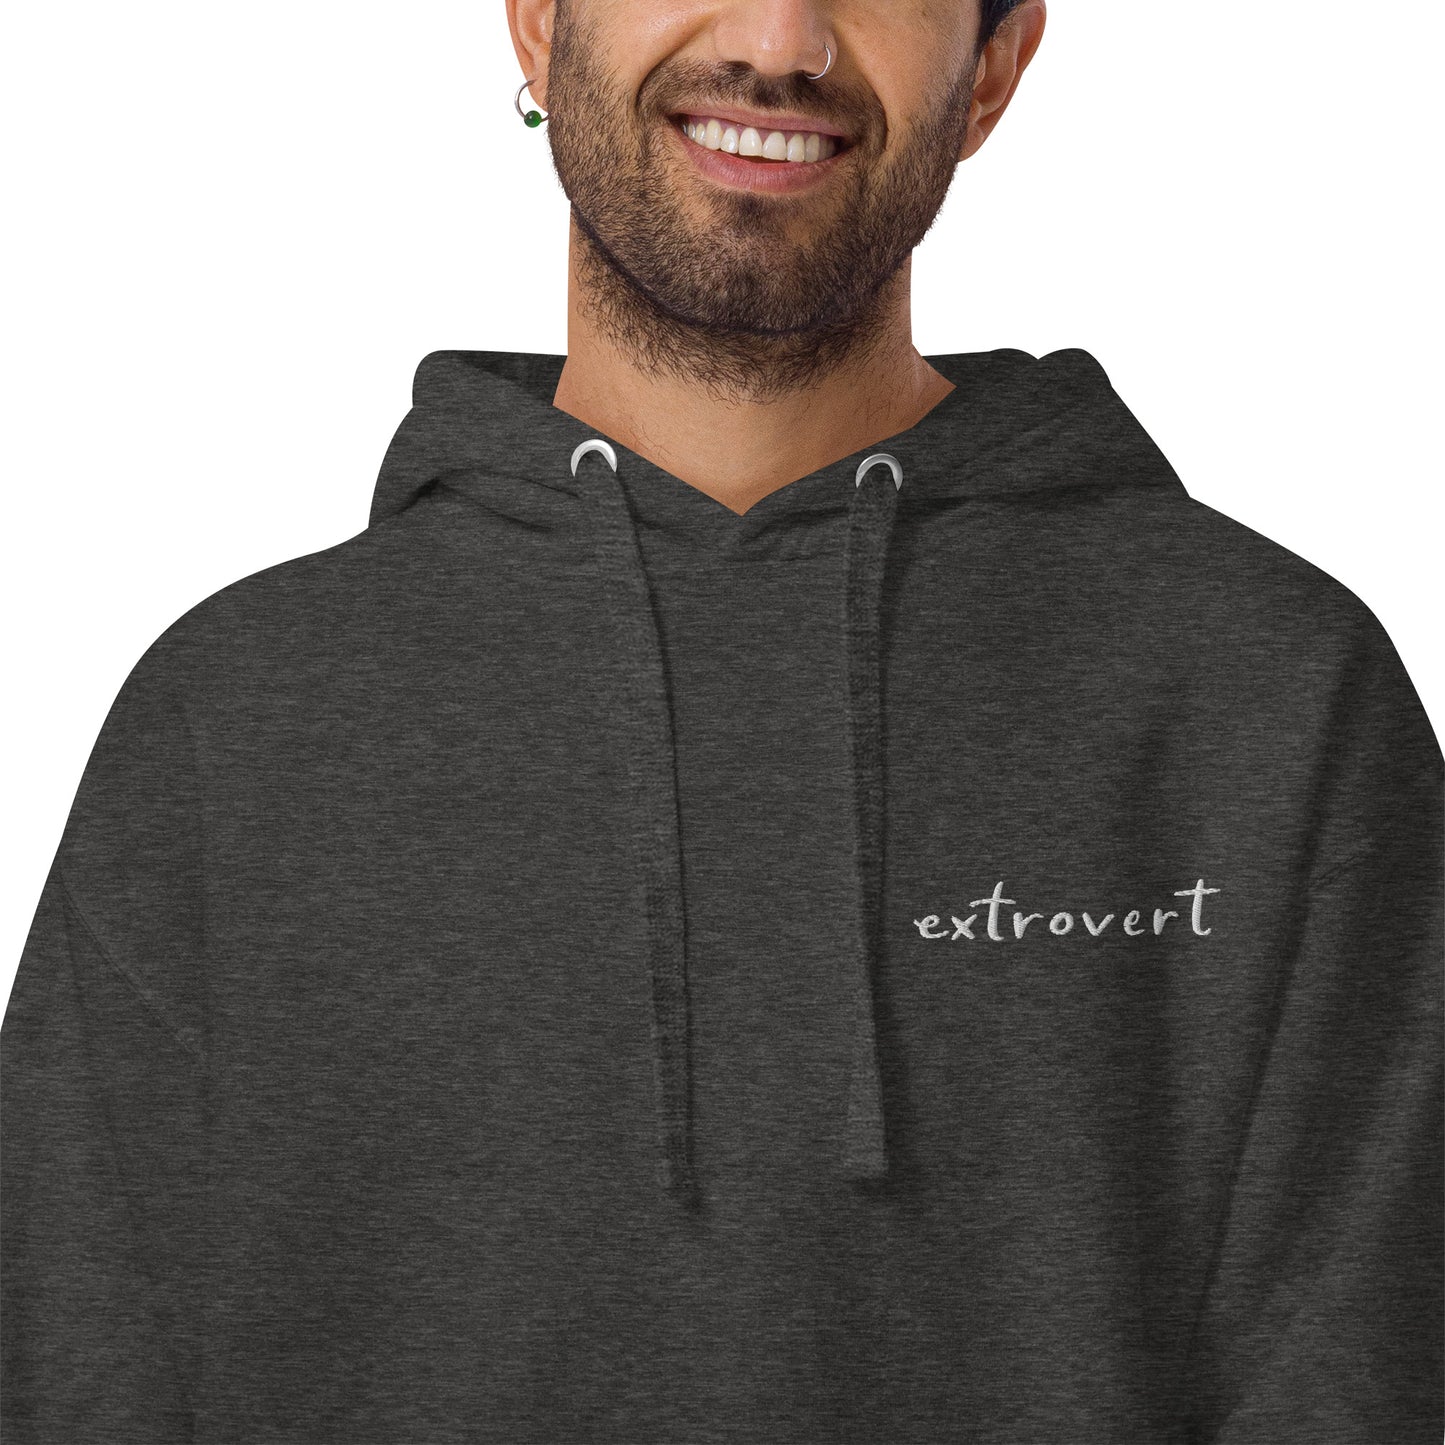 Embroidered Hoodie "extrovert"